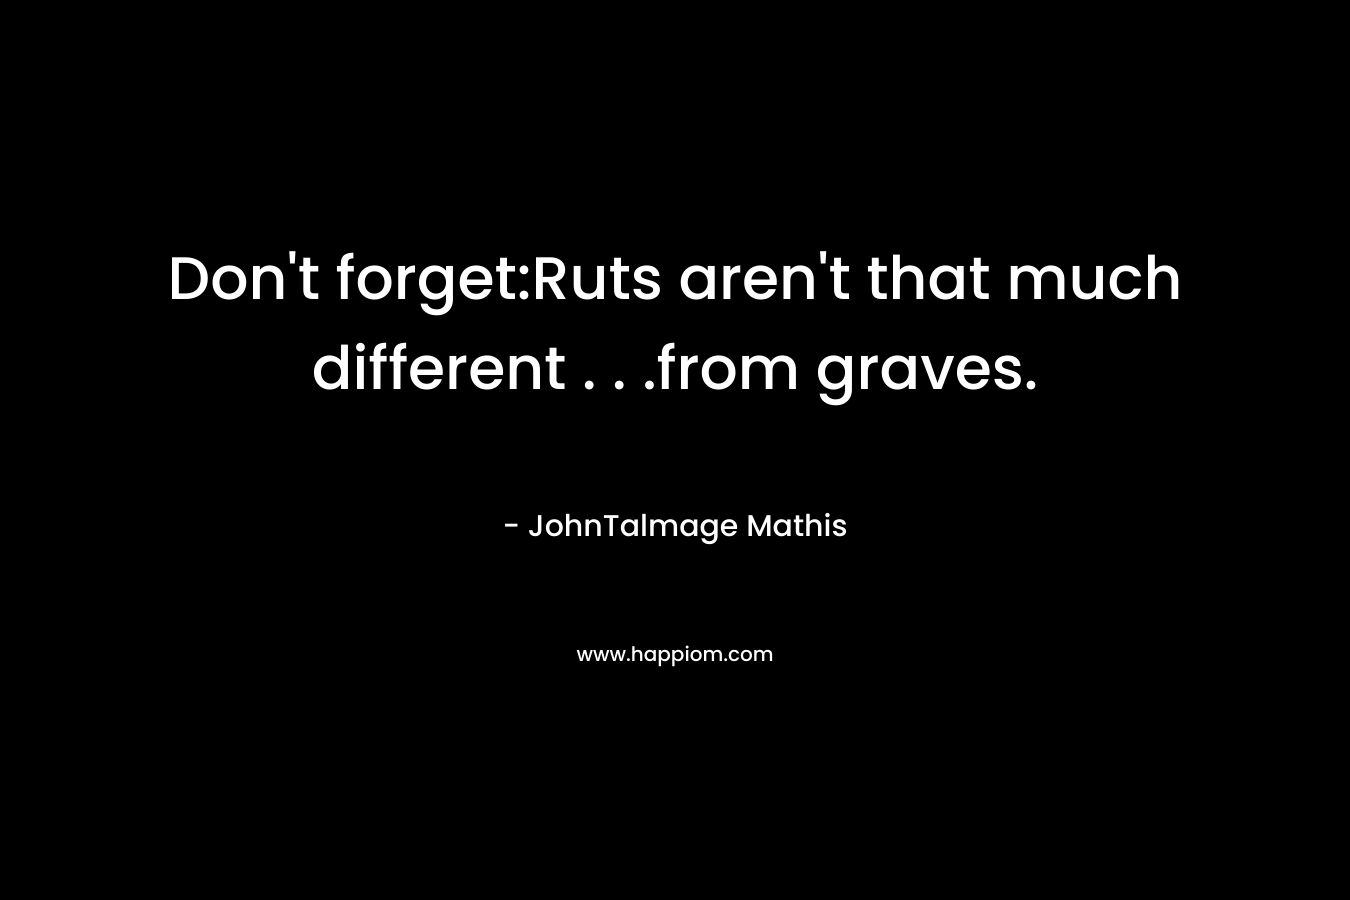 Don't forget:Ruts aren't that much different . . .from graves.